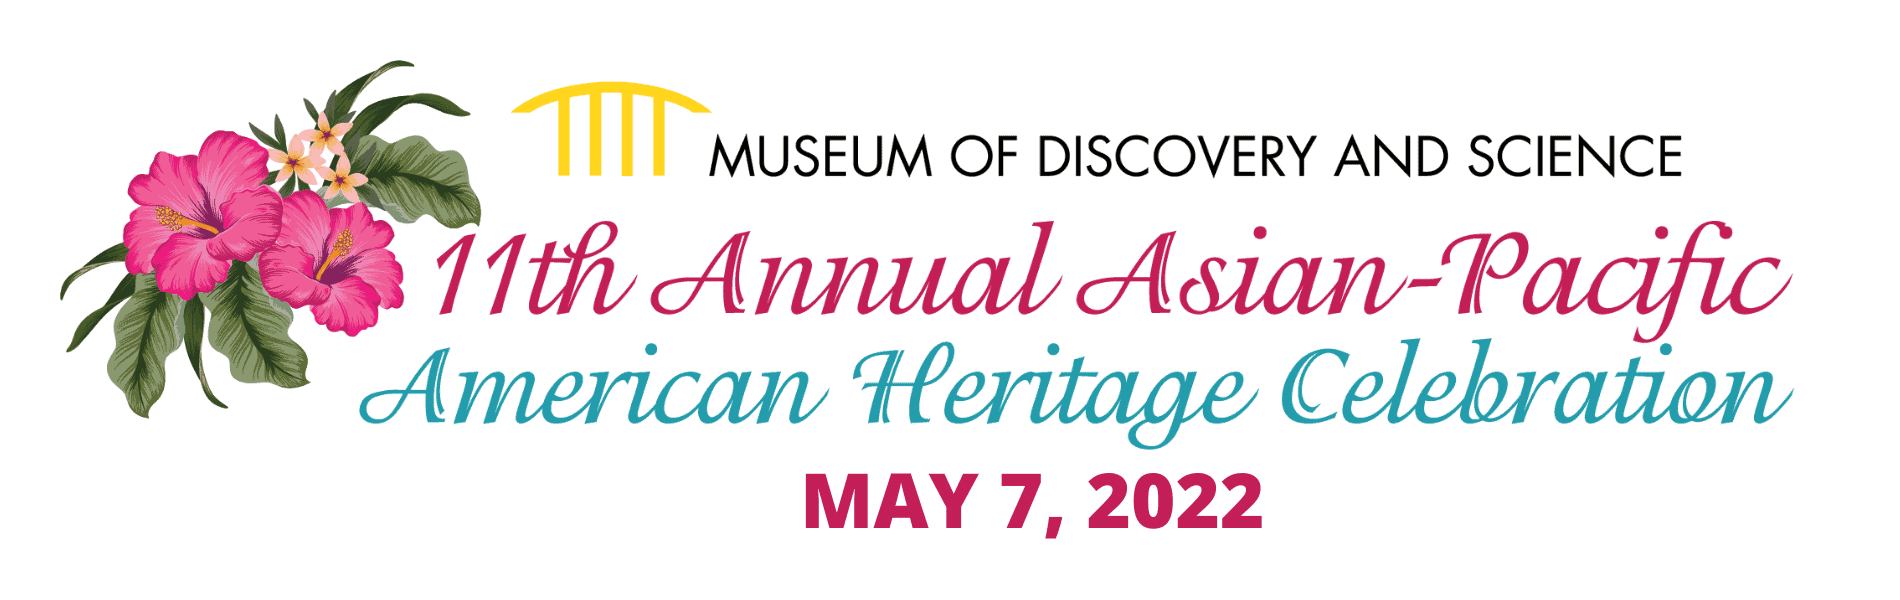 Museum of Discovery and Science - 11th Annual Asian Pacific American Heritage Celebration 2022